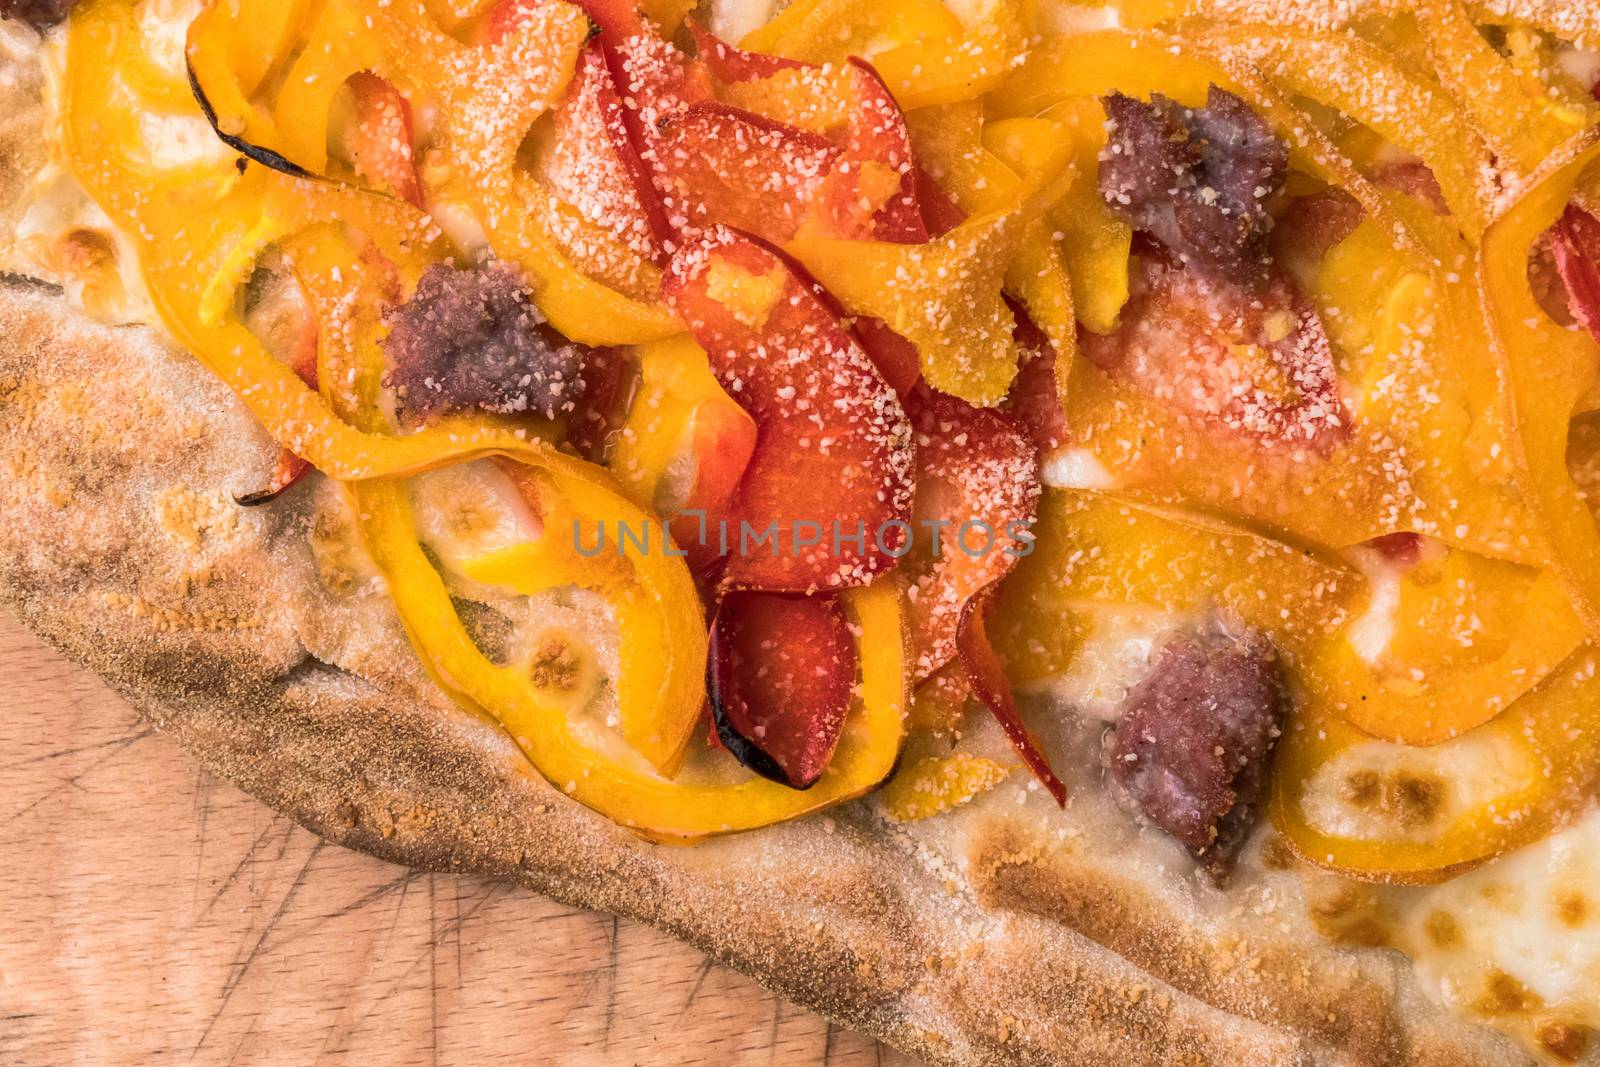 Sausage and peppers Pizza by germanopoli